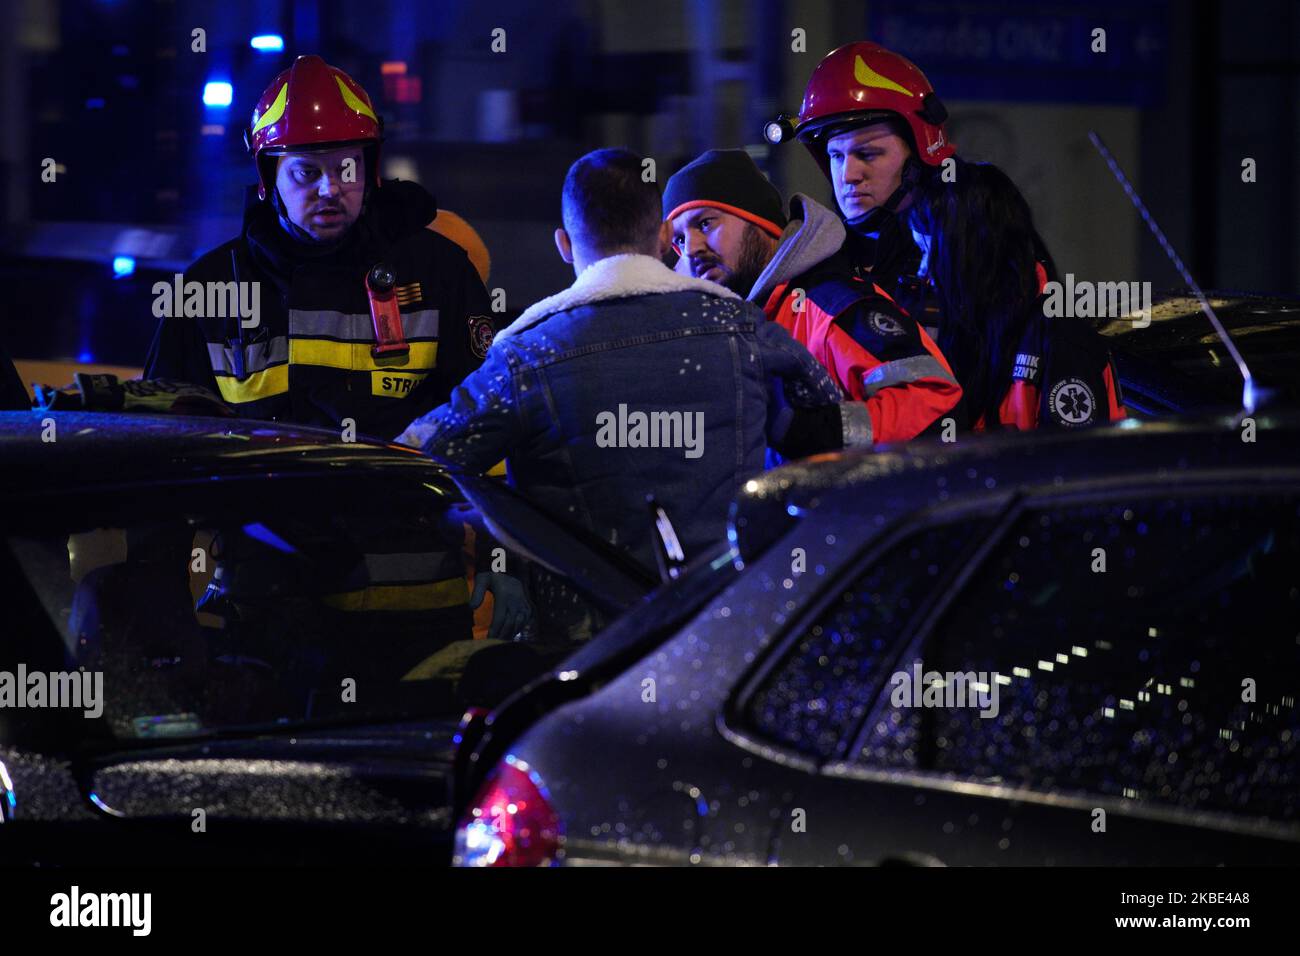 A man is helped by members of the fire brigade after a car collission in Warsaw, Poland on January 8, 2020. Four cars crashed into each other on Wednesday evening in the city's main main high-capacity road. No serious casualties have been reported despite heavy damage to vehicles. (Photo by Jaap Arriens/NurPhoto) Stock Photo